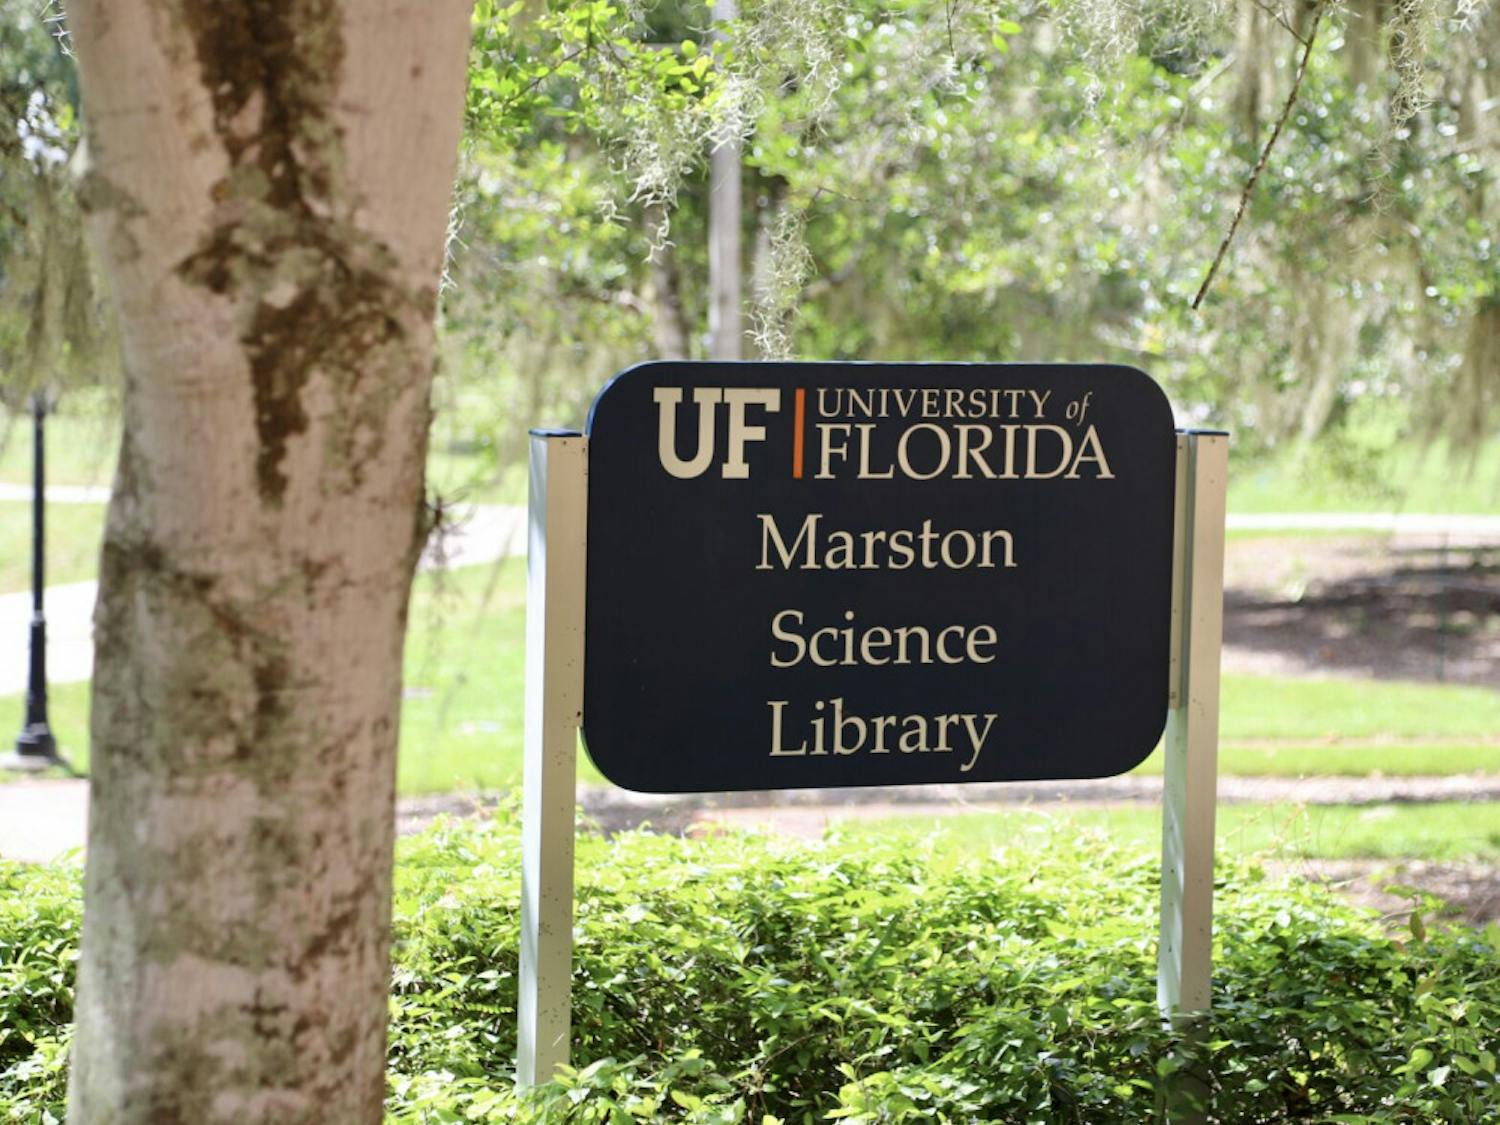 To combat the spread of COVID-19 in public spaces, the UF Smathers libraries have reduced computers, tables, hours and capacities.&nbsp;